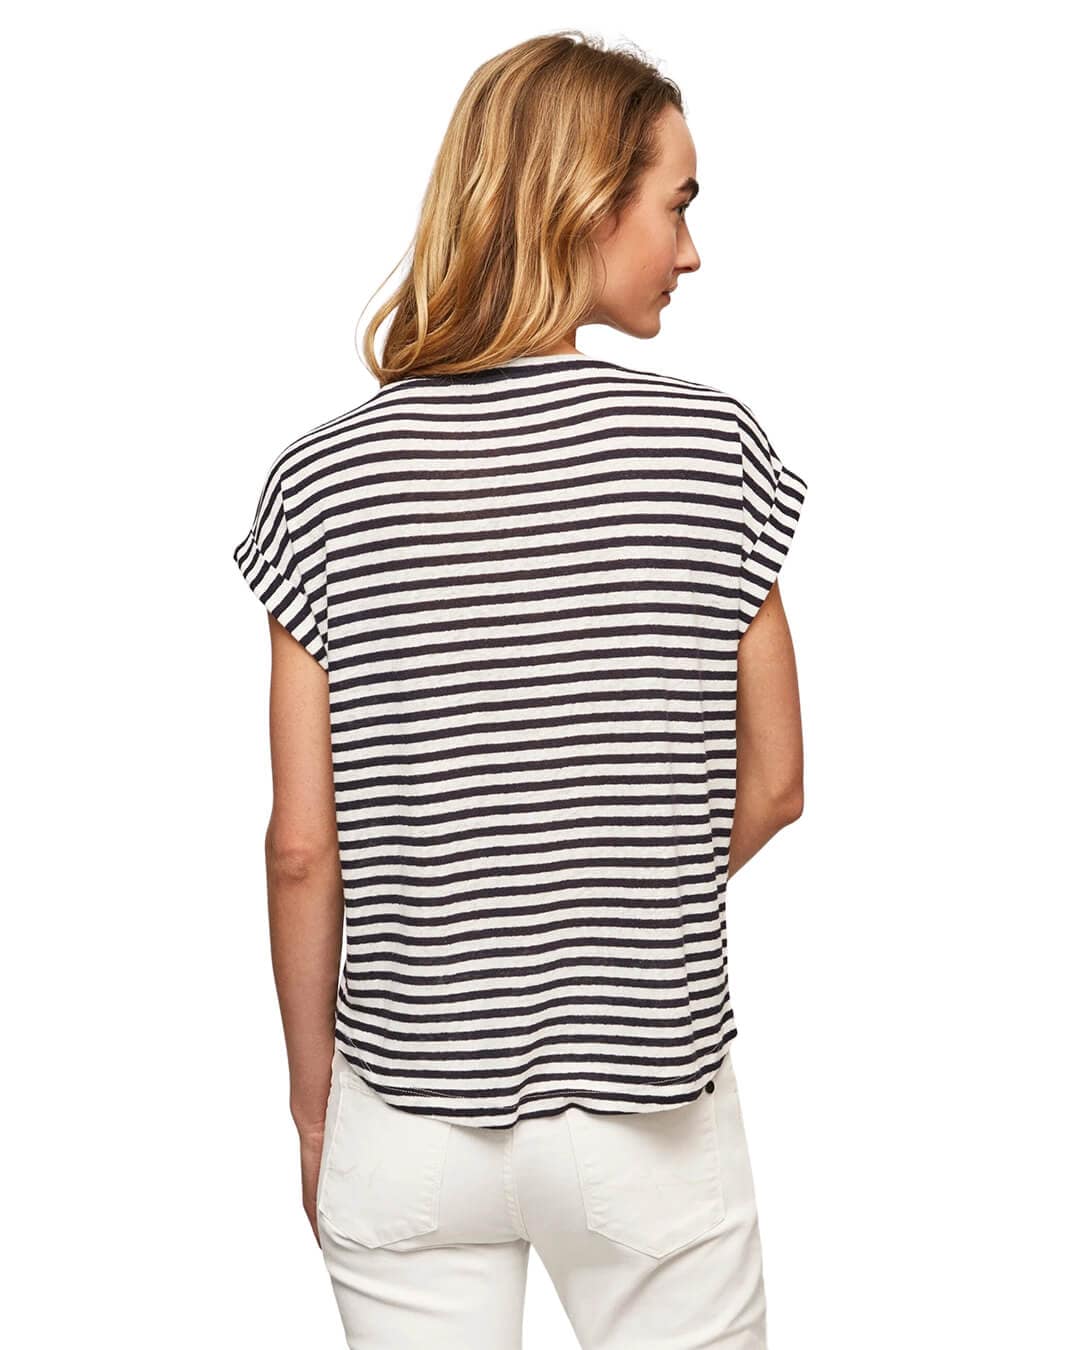 Pepe Jeans T-Shirts Pepe Jeans Navy Striped Print T-Shirt